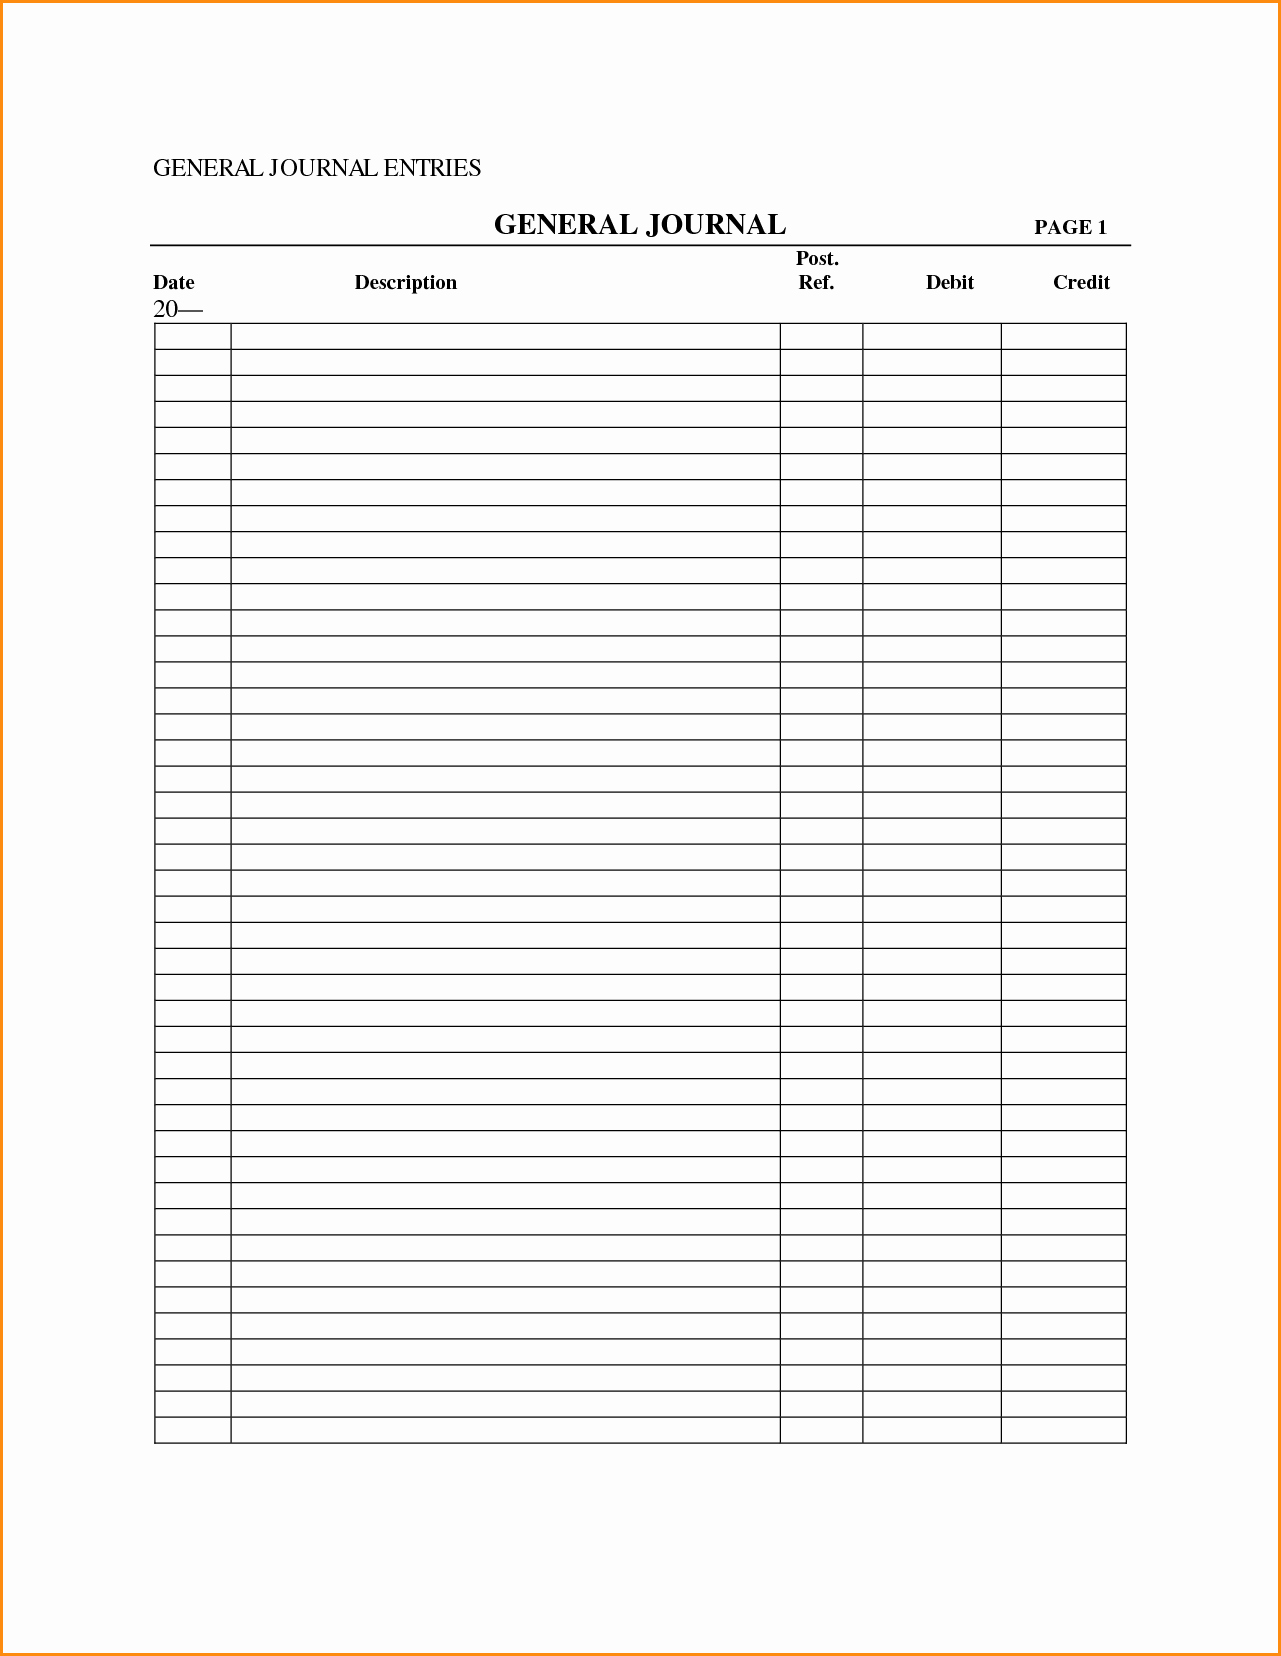 Accounting Journal Entries Template Lovely Accounting General Journal Entry Template – Down town Ken More